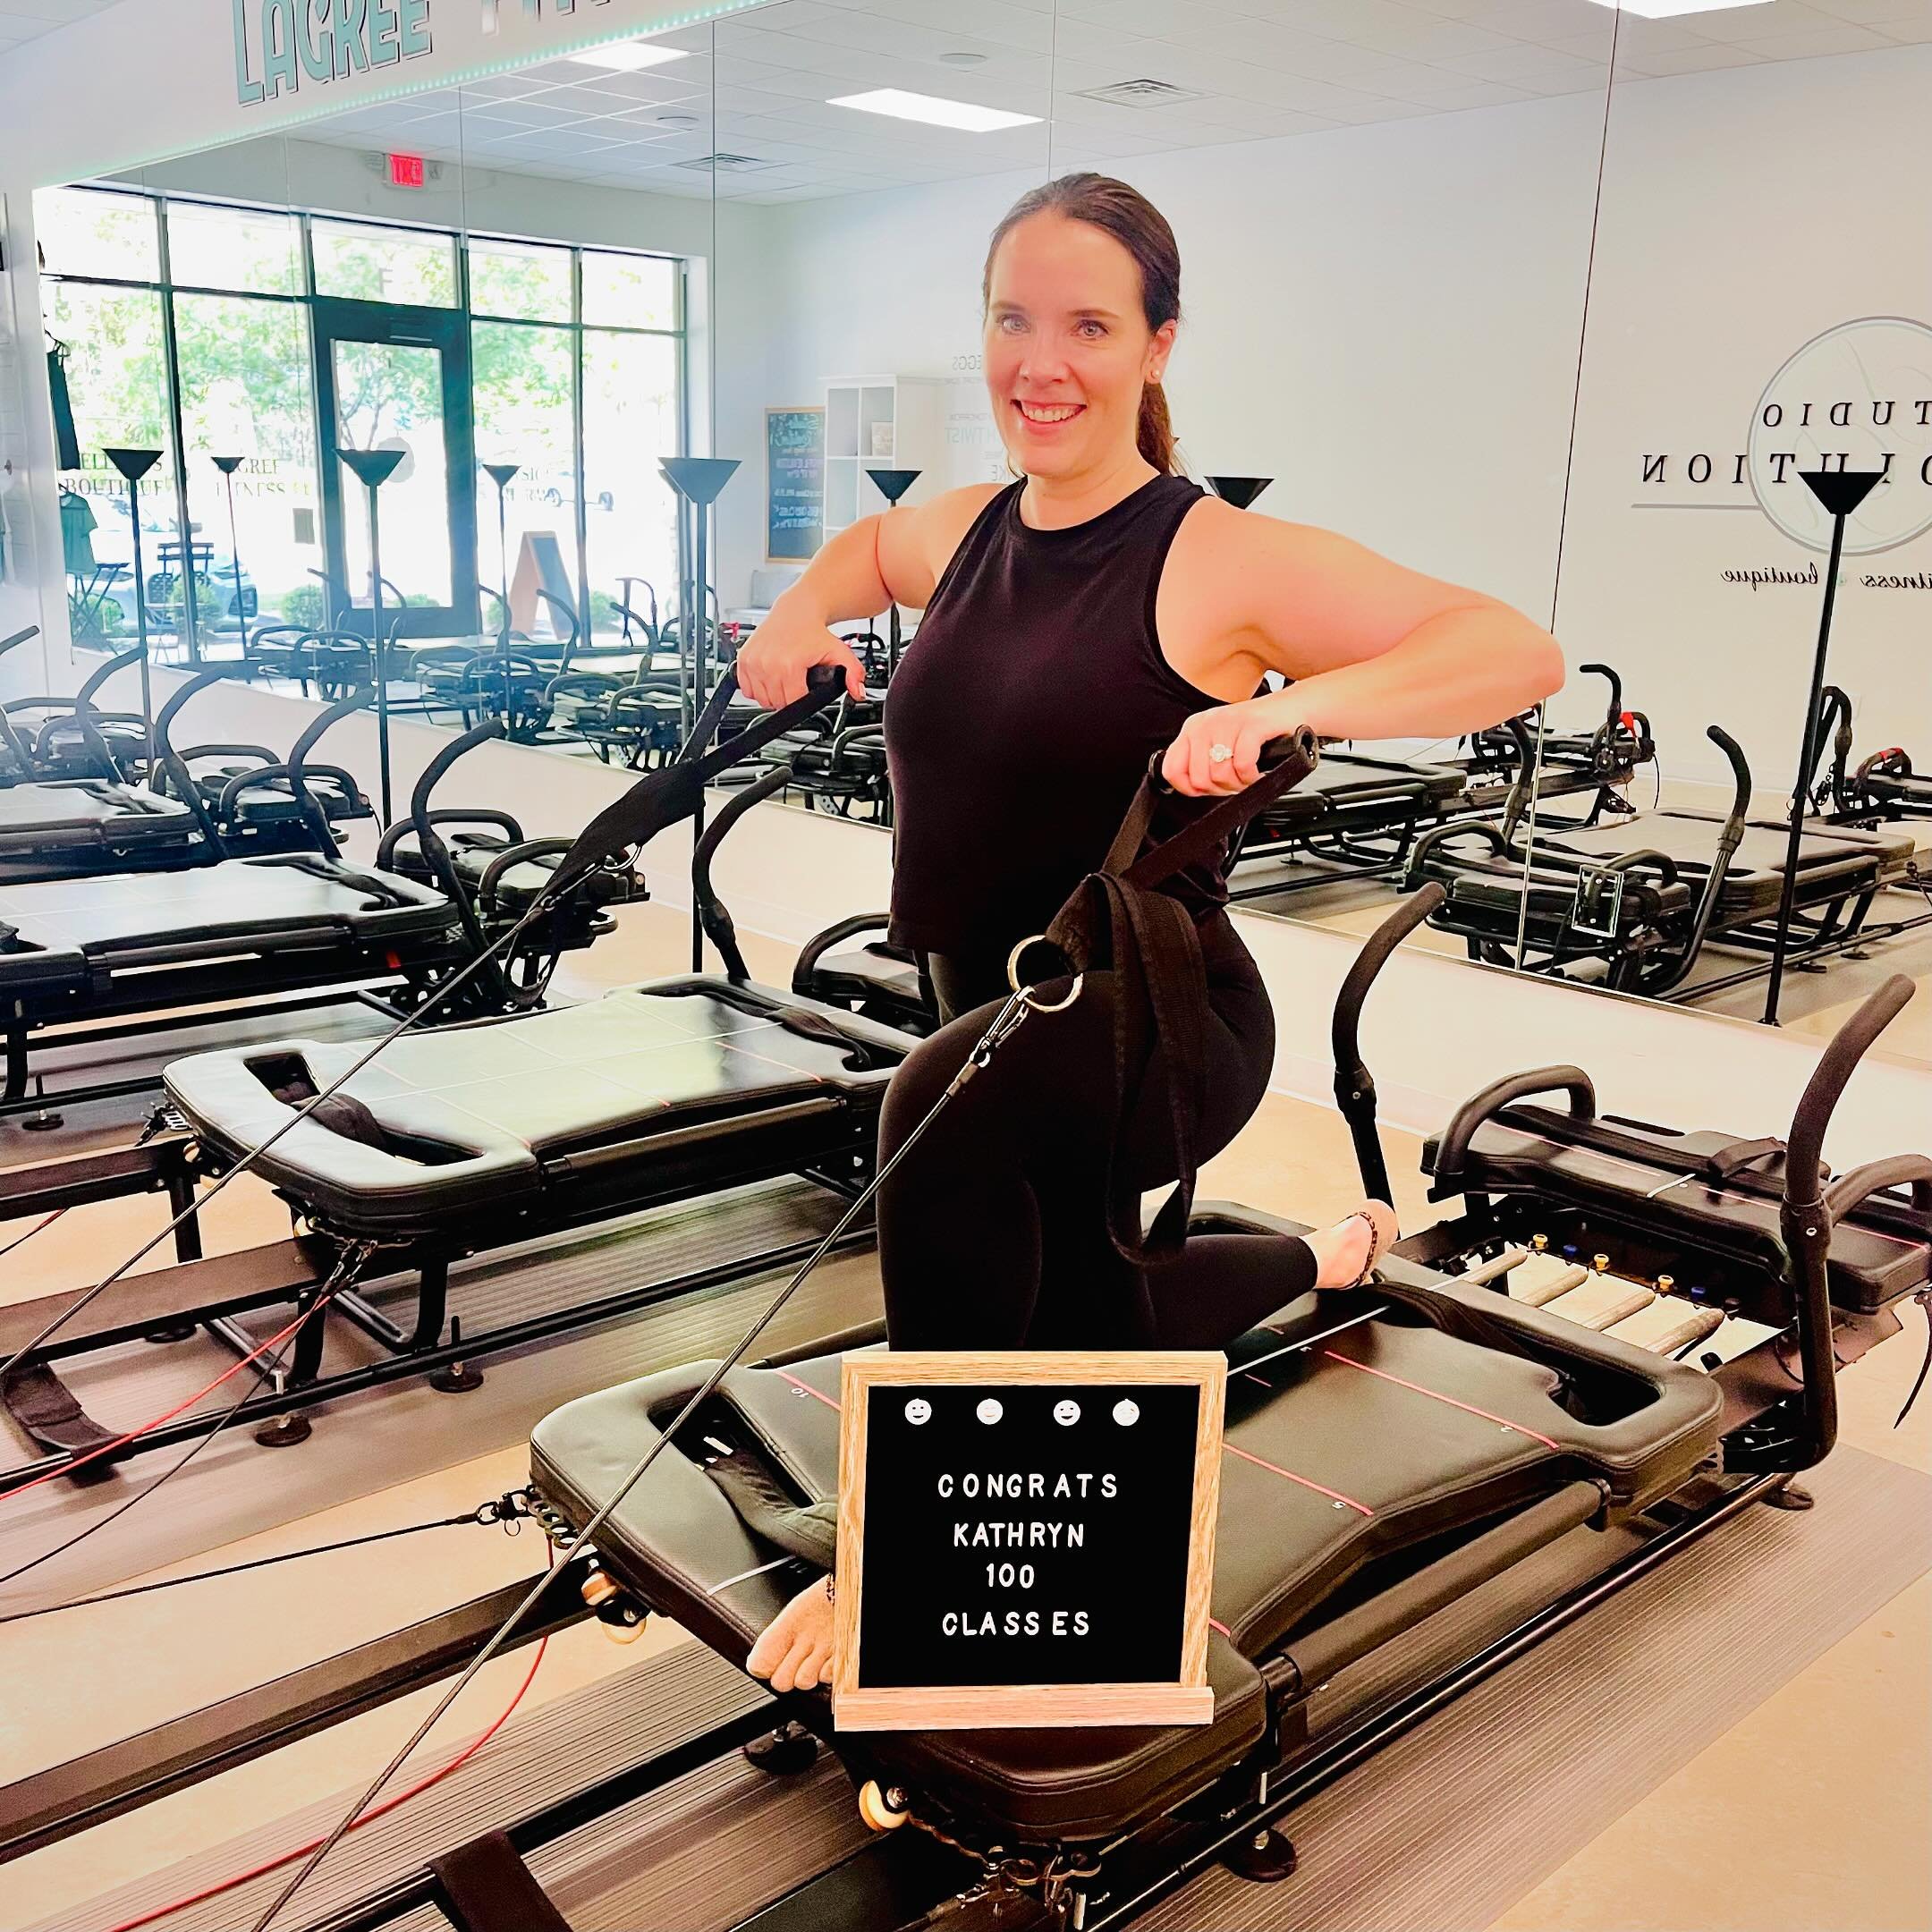 Join us in celebrating Kathryn as she becomes the newest member of the Mega 100 Class Club!! This gorgeous gal is as sweet as she is strong. Kathryn approaches her workouts with focus and poise, always determined to take advantage of every moment she